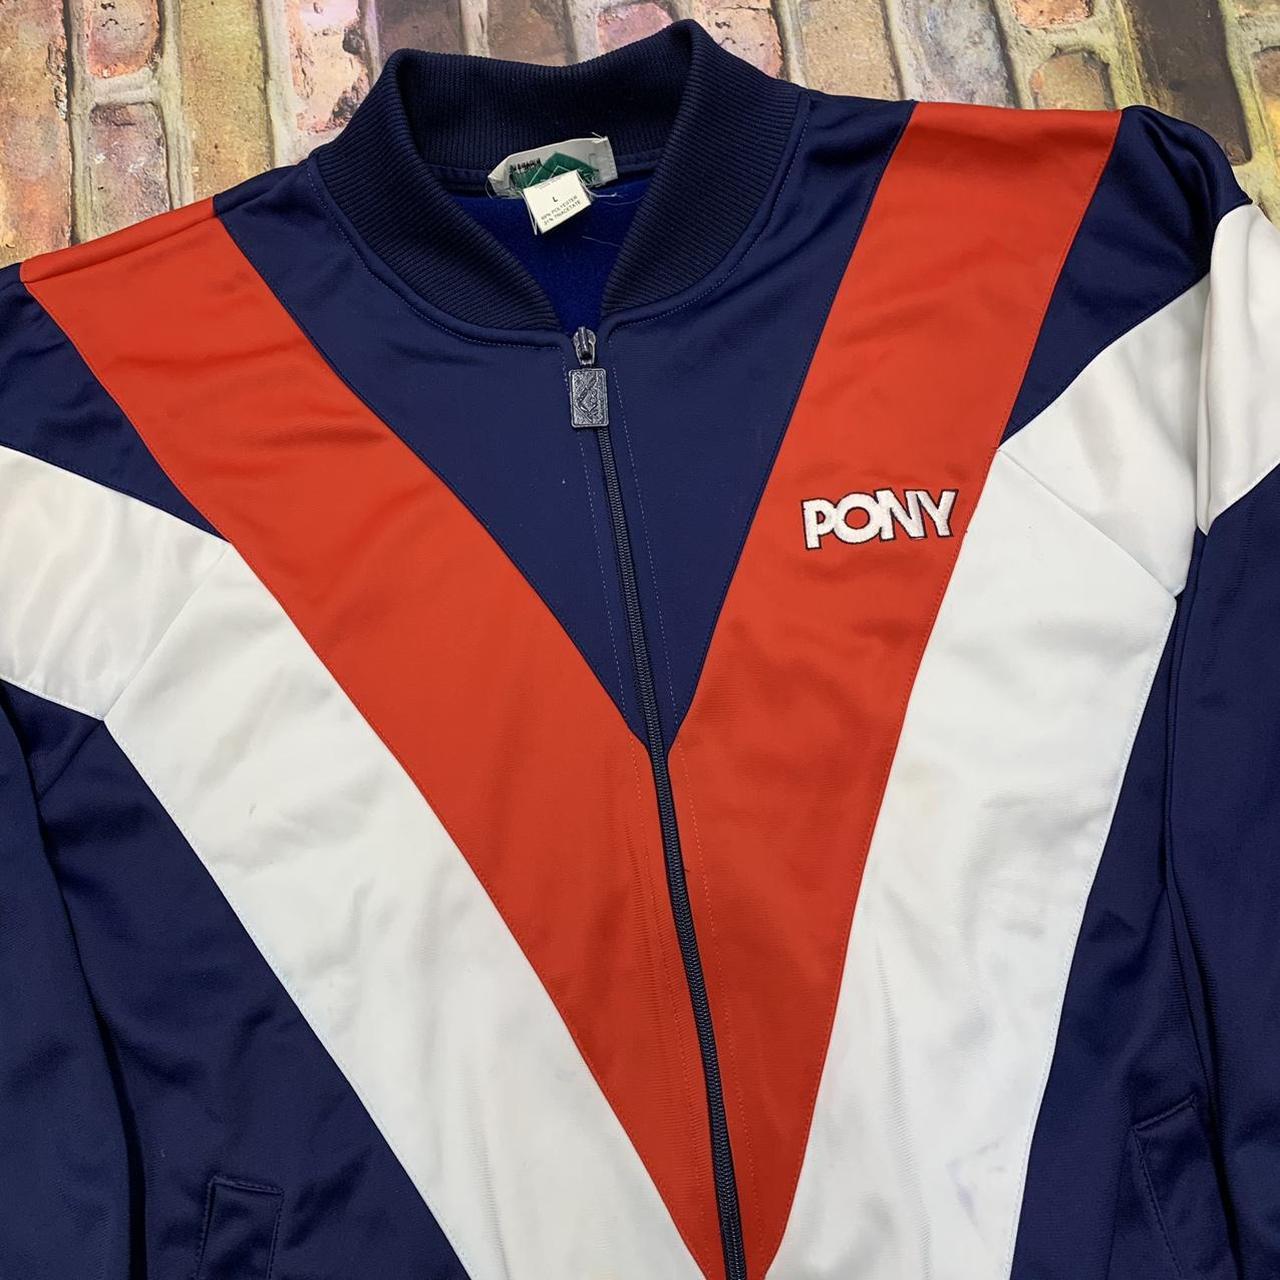 Product Image 3 - Vintage PONY track jacket. From